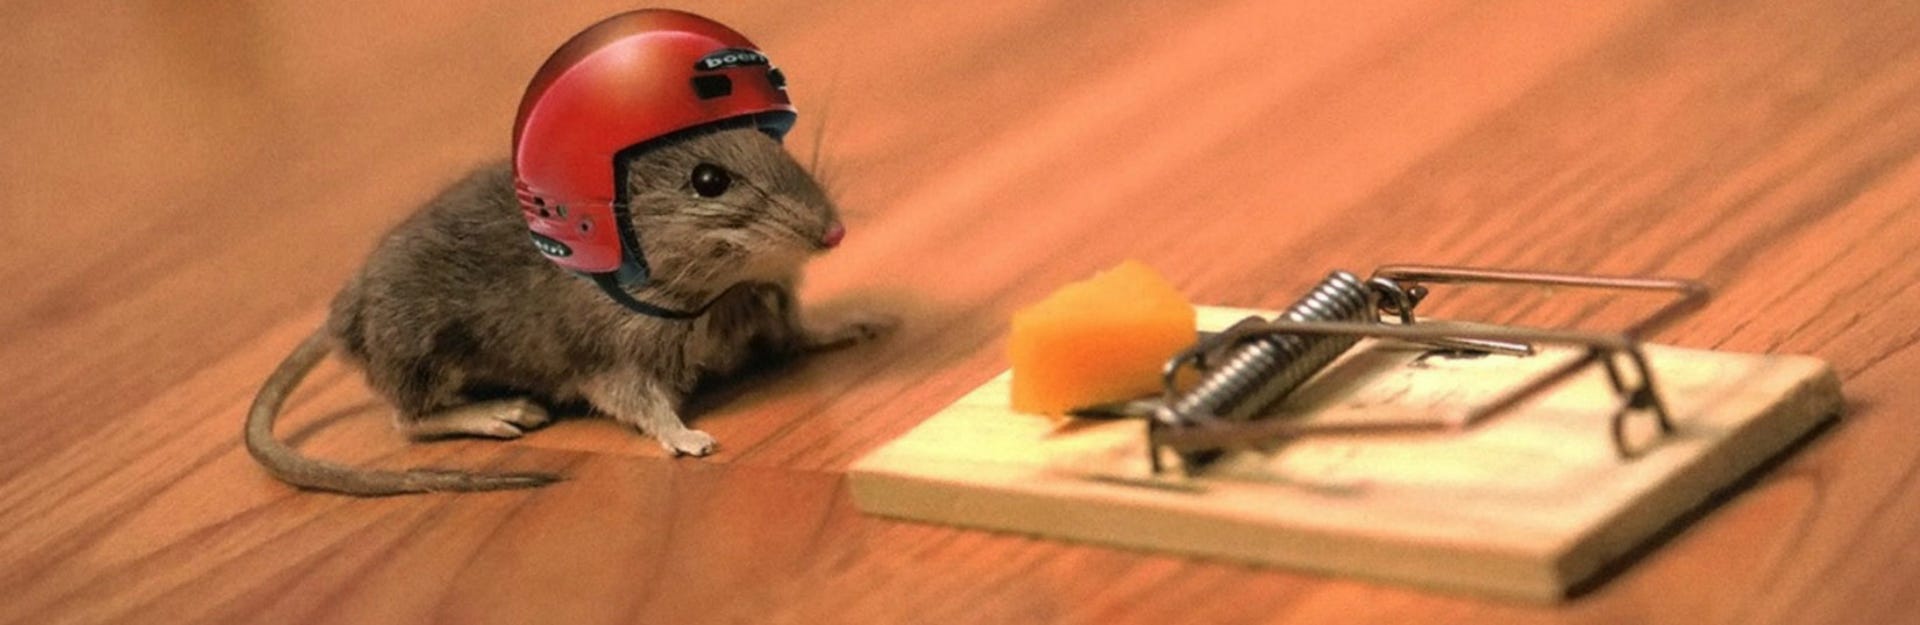 Of 'Better Mousetraps': This Product is So Great It Sells Itself! — Greg  Coticchia, by Queble